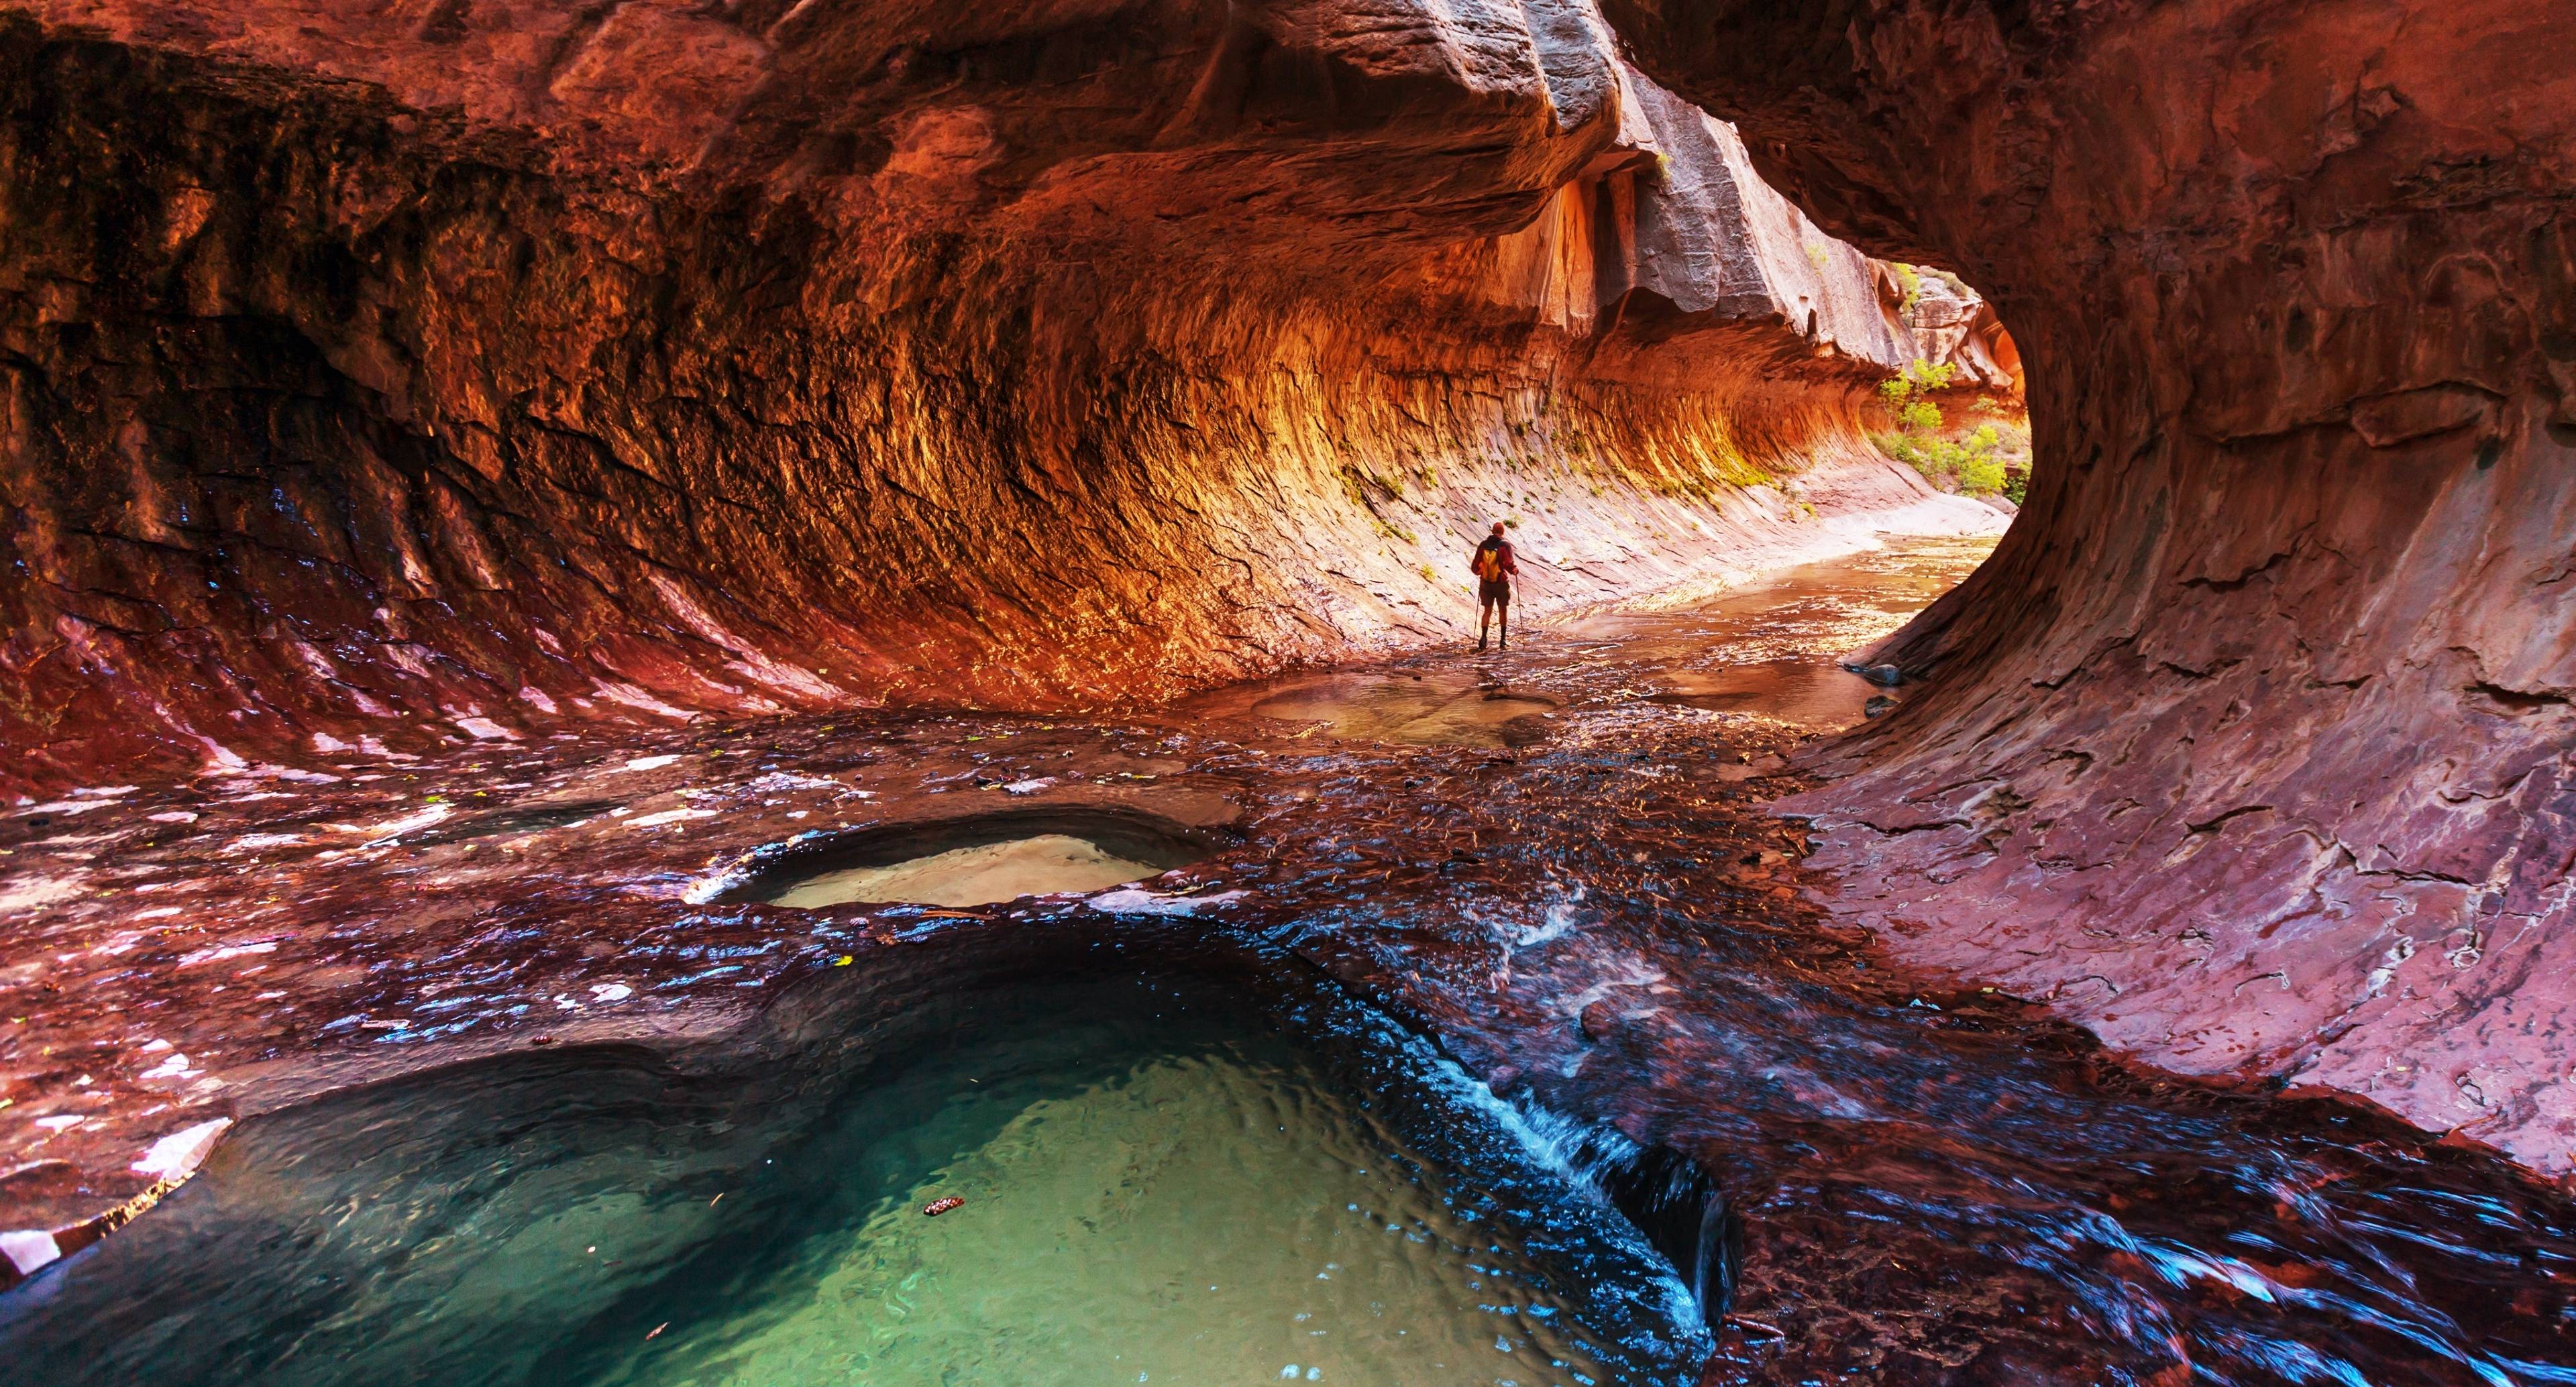 Spend Most of the Day at Zion National Park